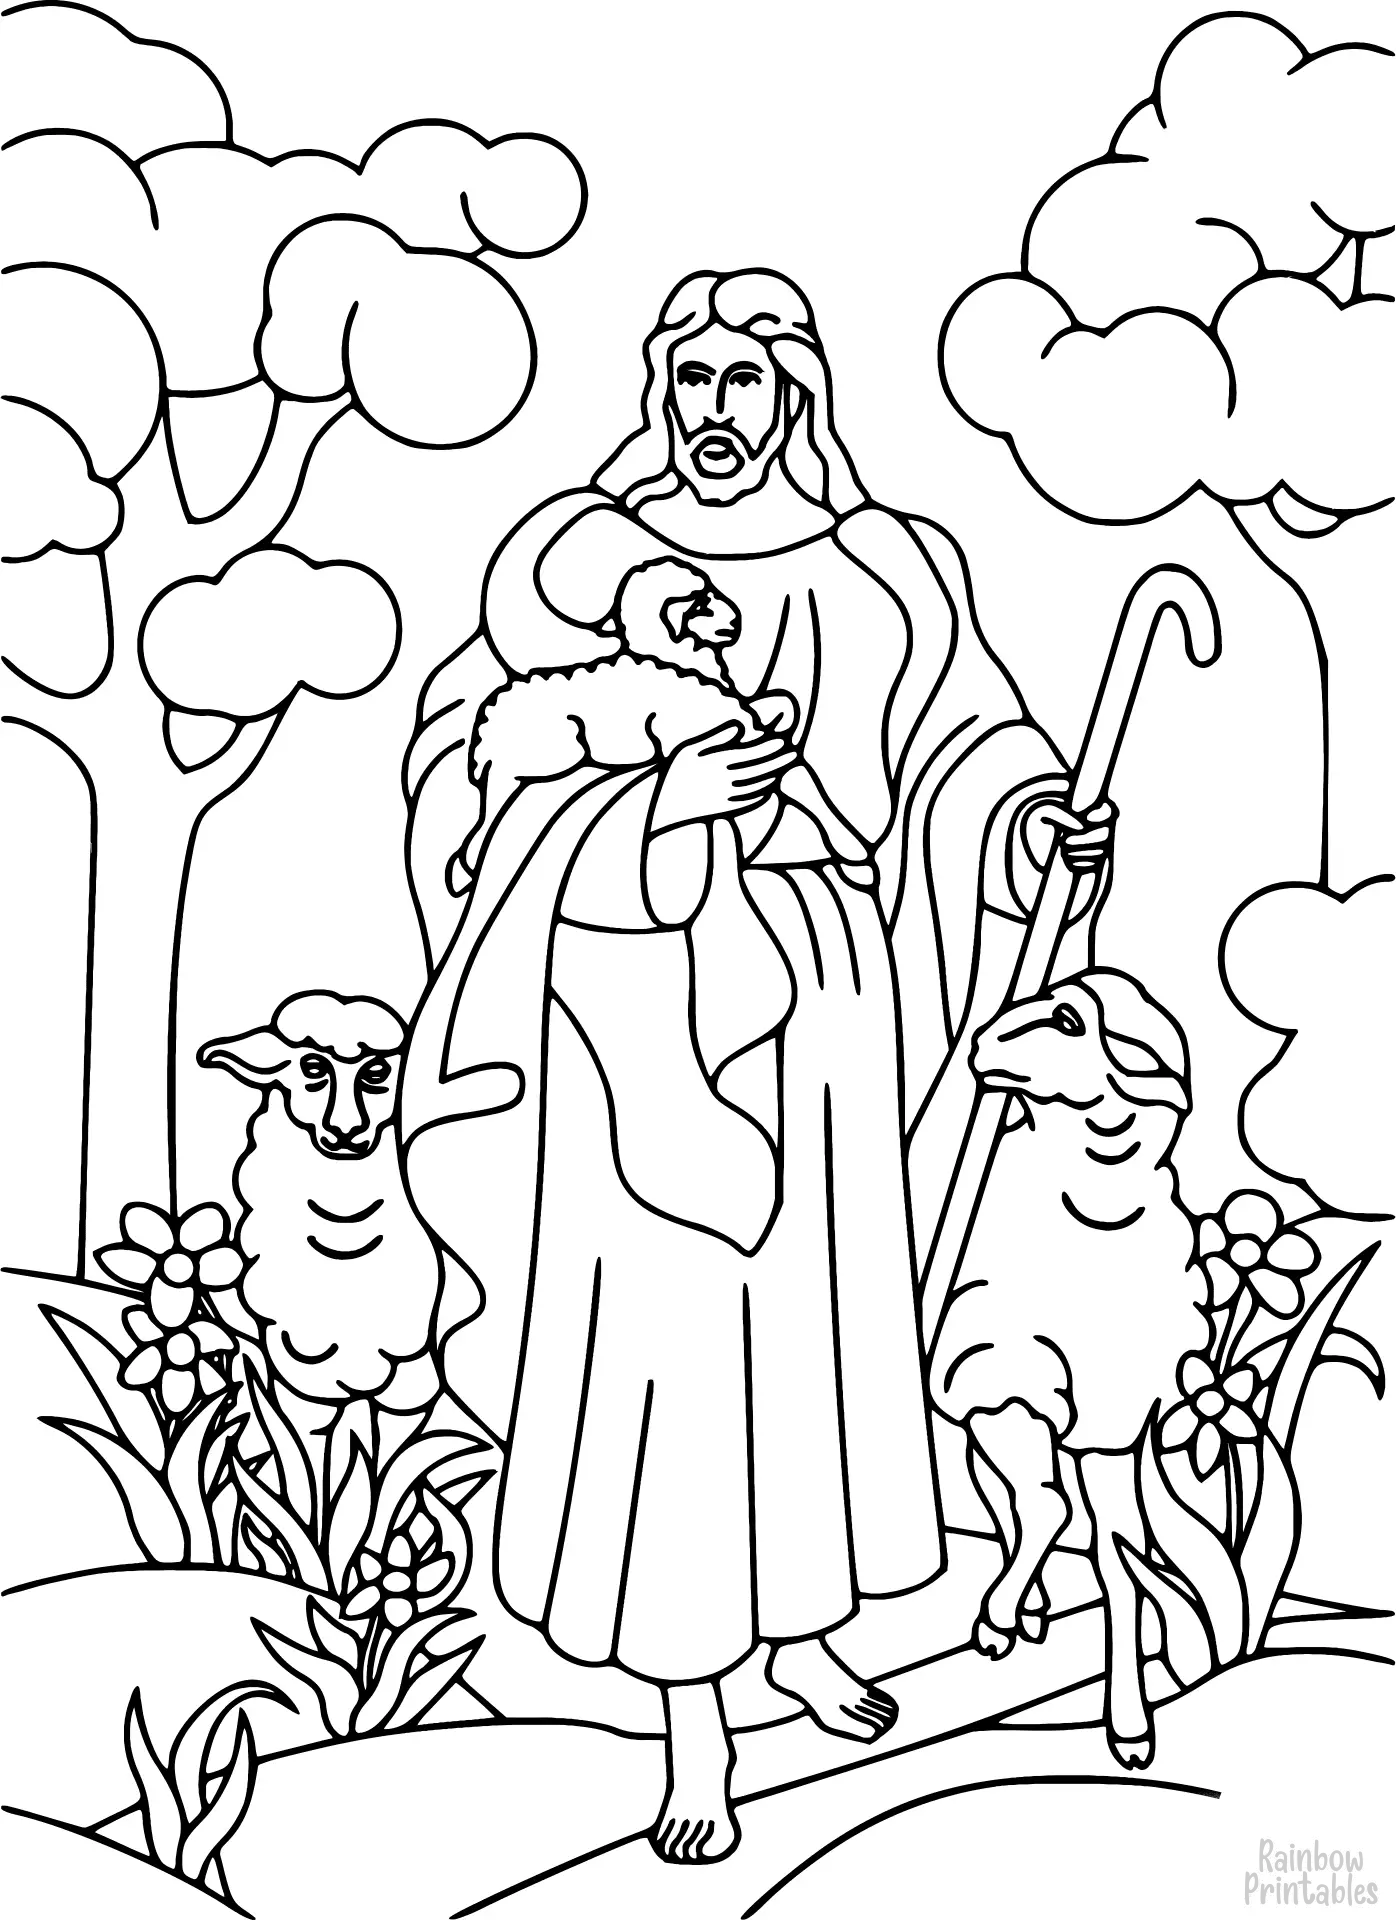 Line-Drawing-religious-christian-classic-jesus-holding-lamb-coloring-page-for-children